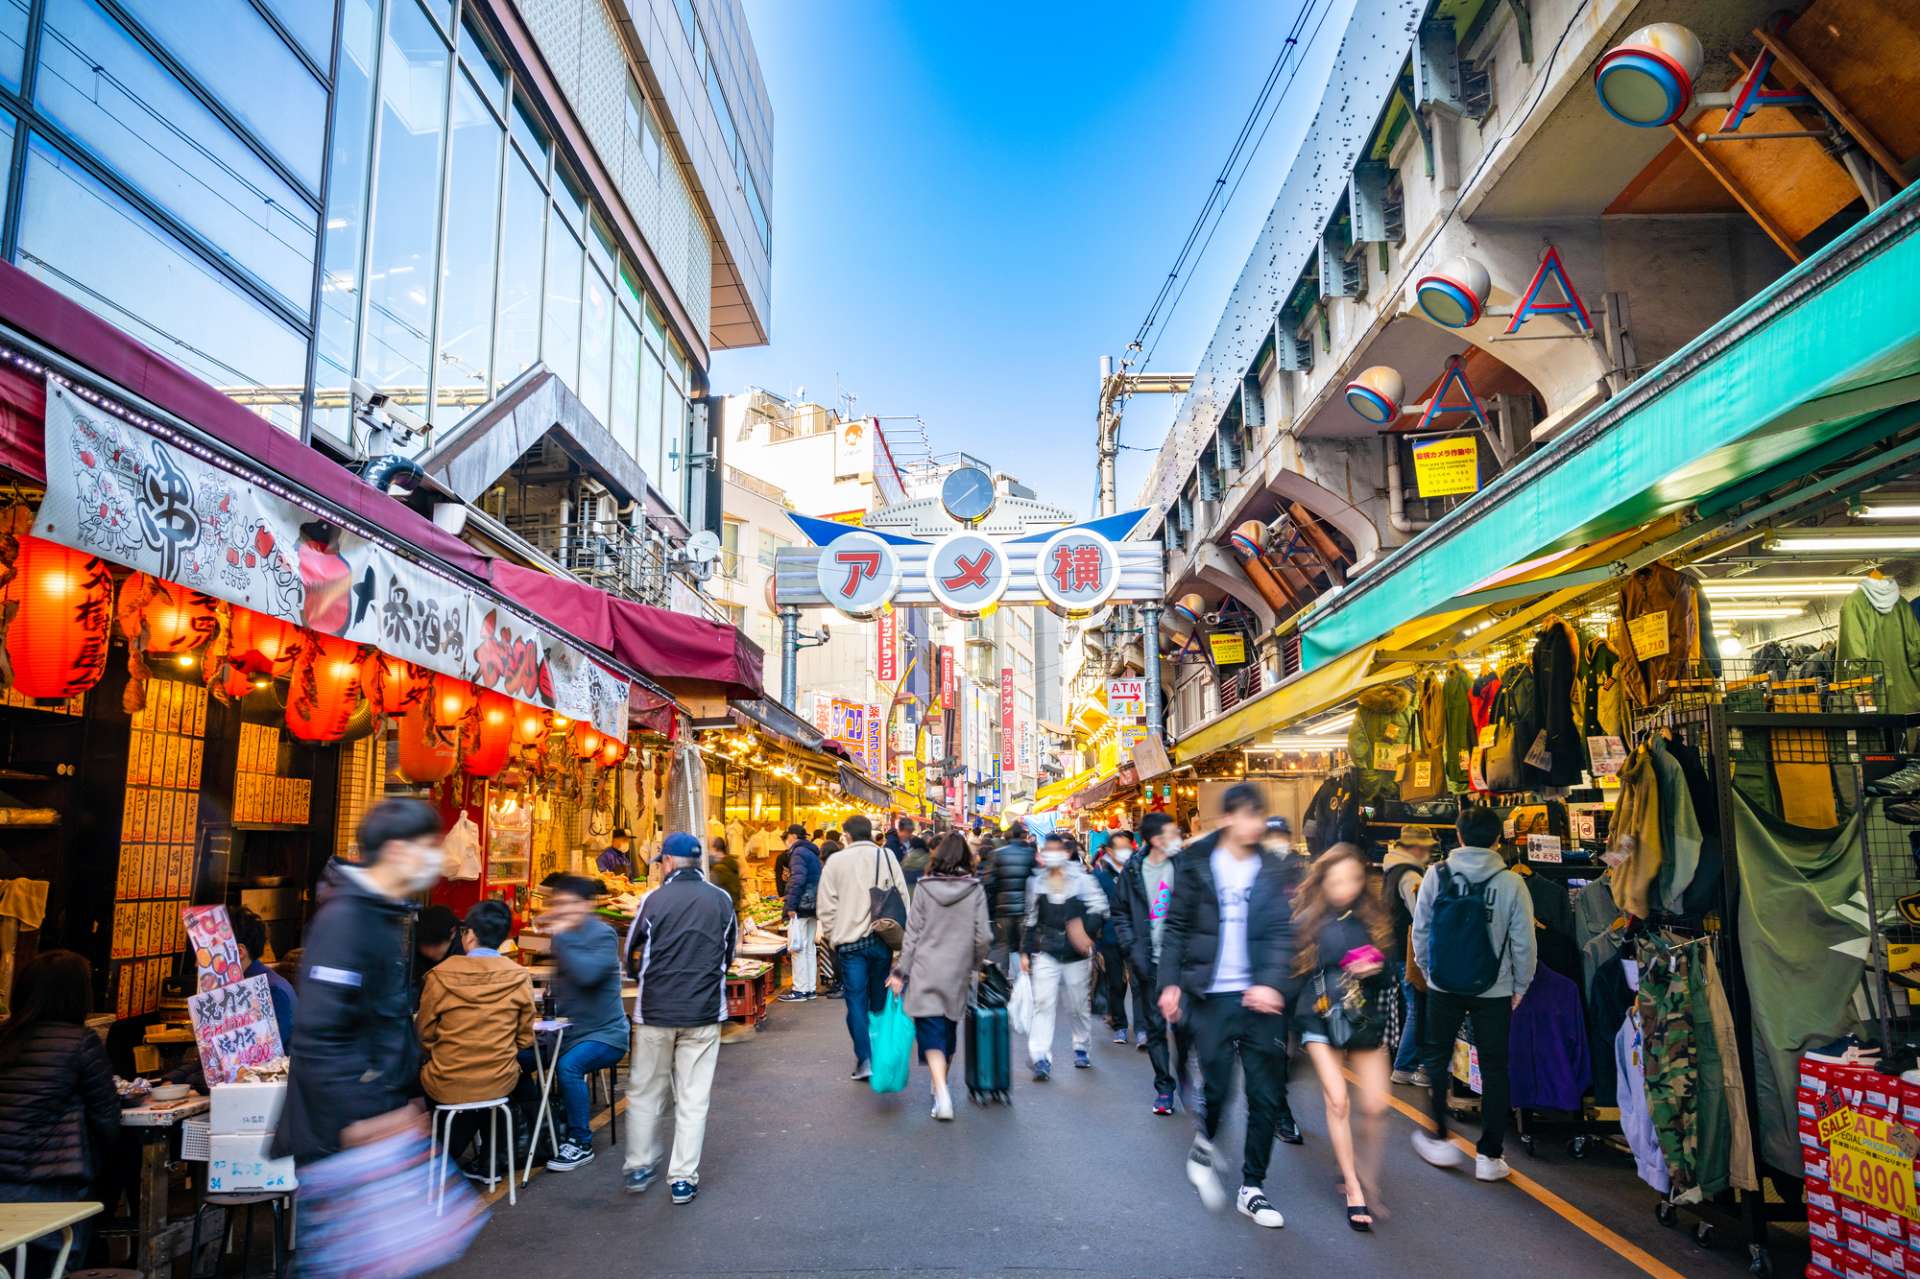 Ameyoko Shopping Street - Must-See, Access, Hours & Price | GOOD LUCK TRIP